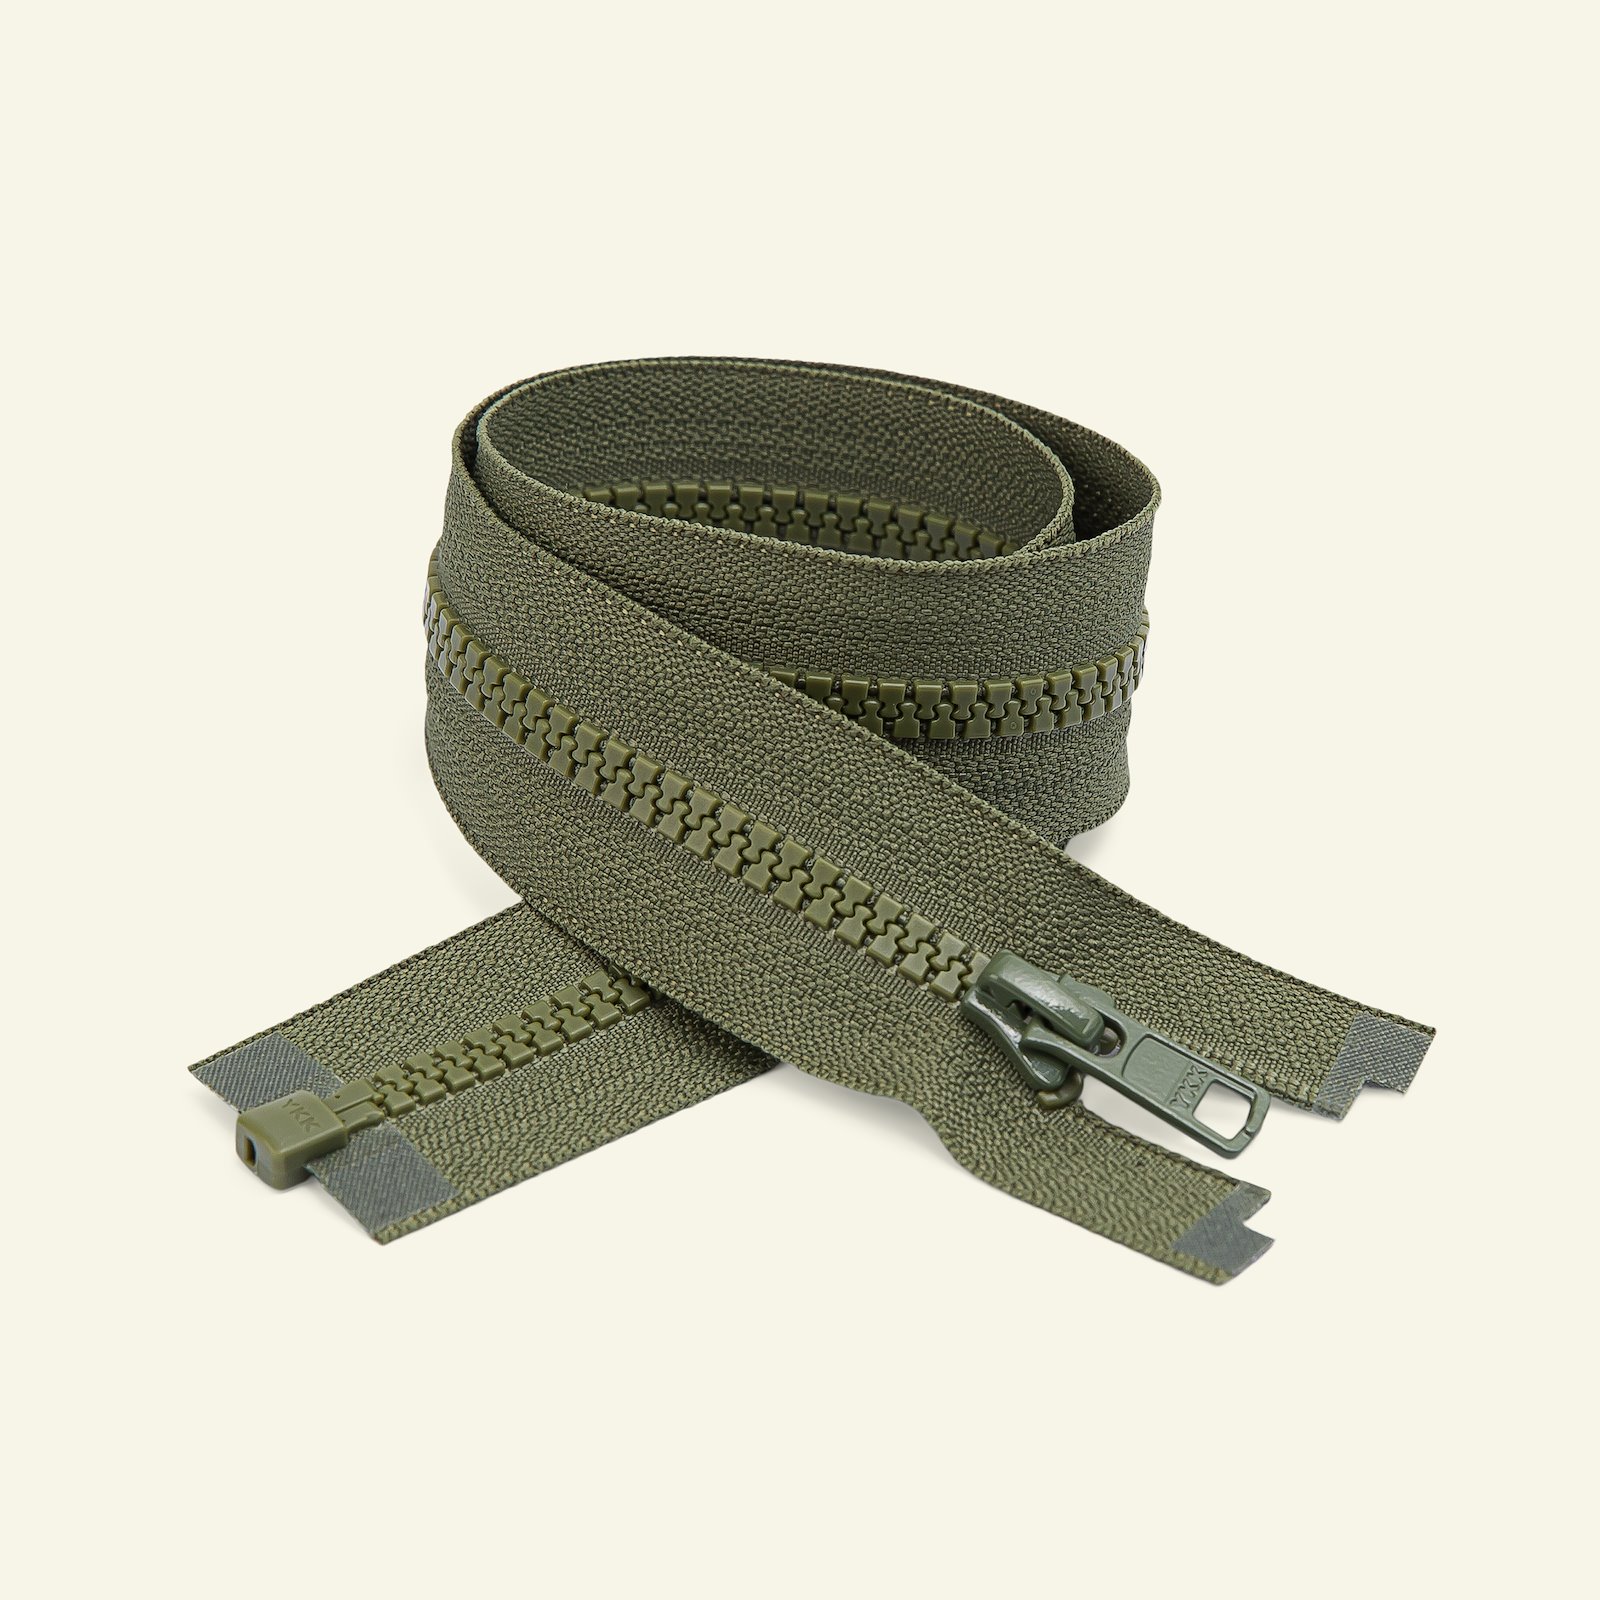 YKK zip 6mm open end 30cm army x50033_pack